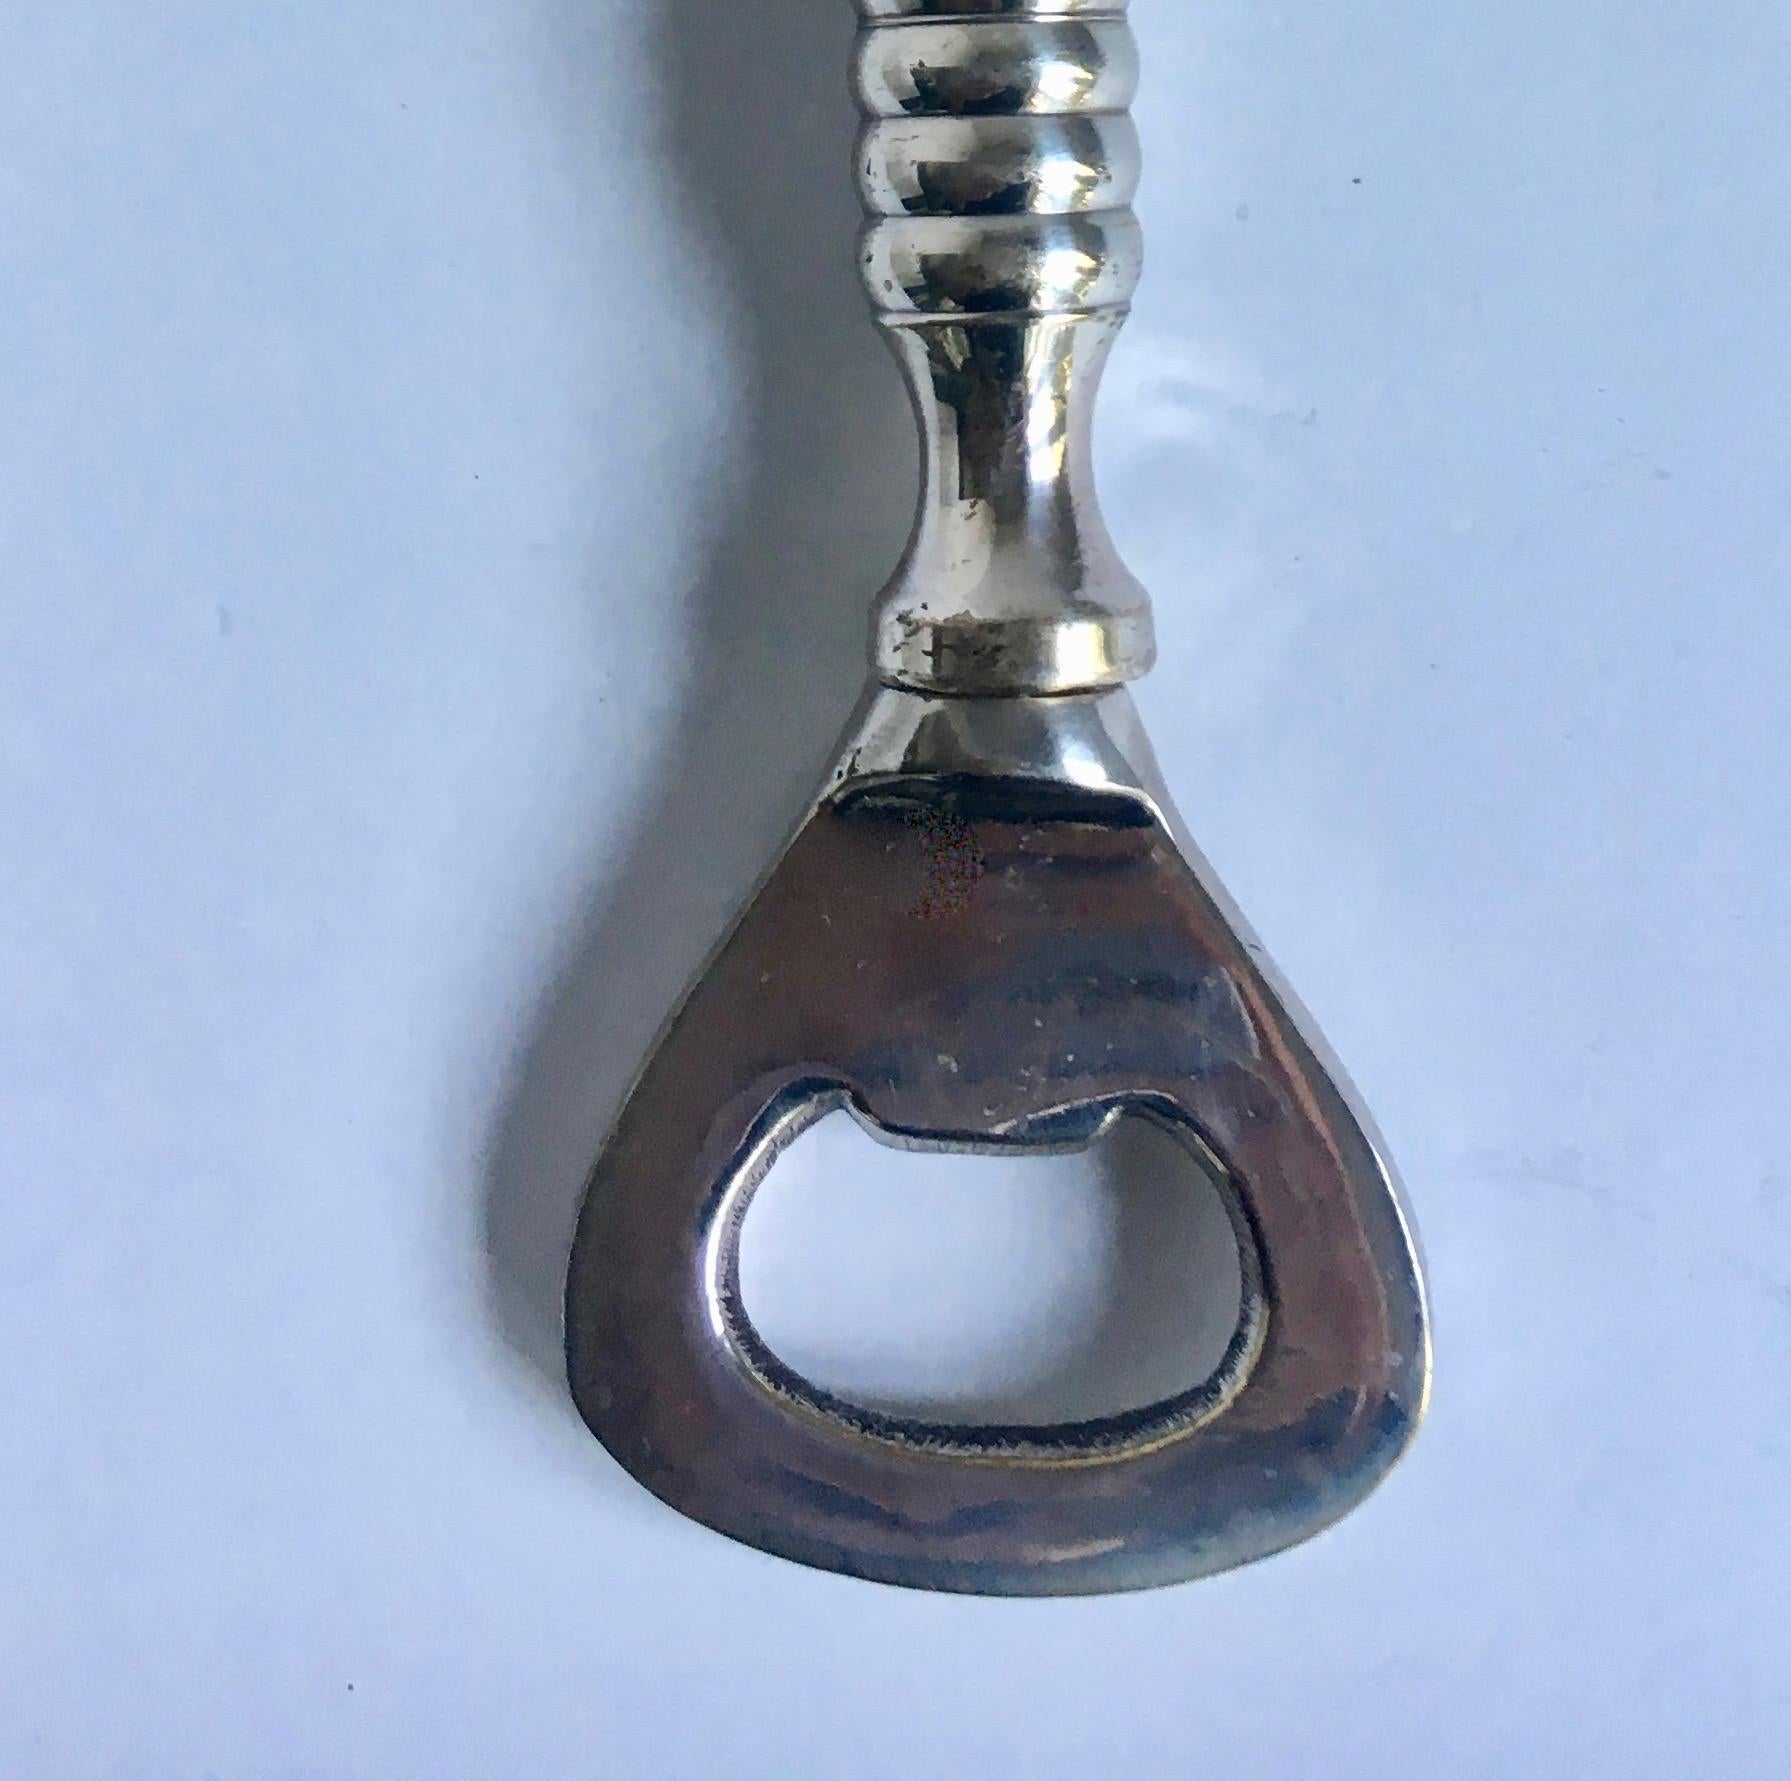 A very handsome bottle opener perfect for any bar or kitchen. Heavy and impressive.